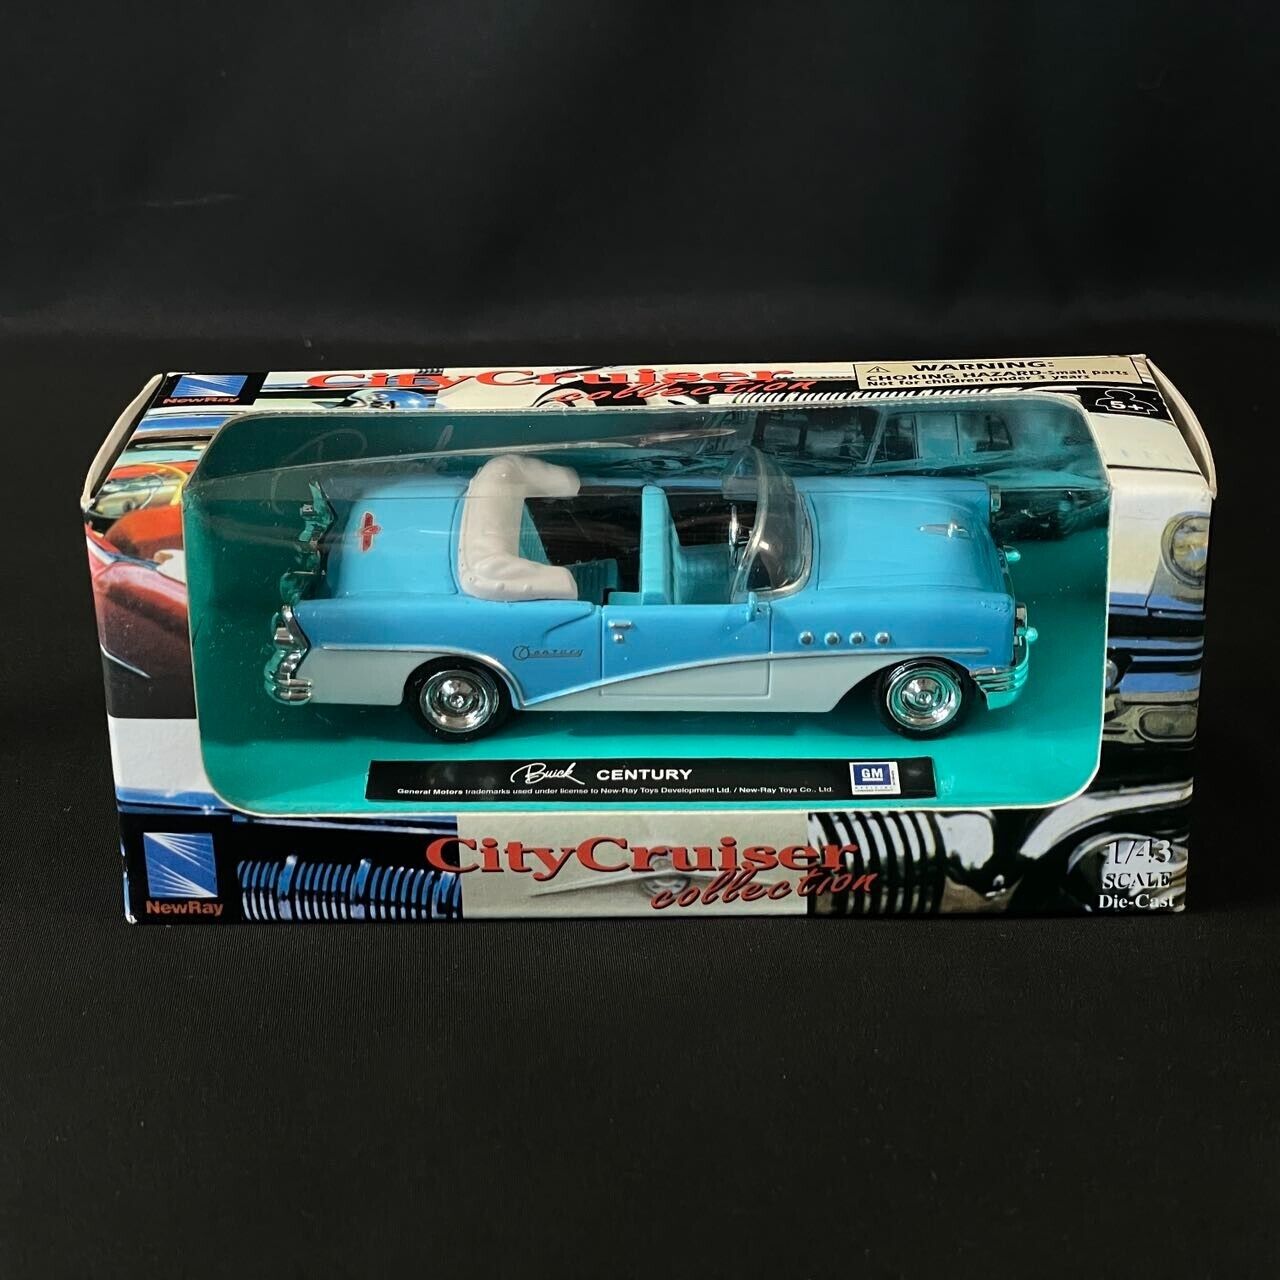 New Ray City Cruisers Collection Buick Century 1955 Model Car 1:43 New In Box